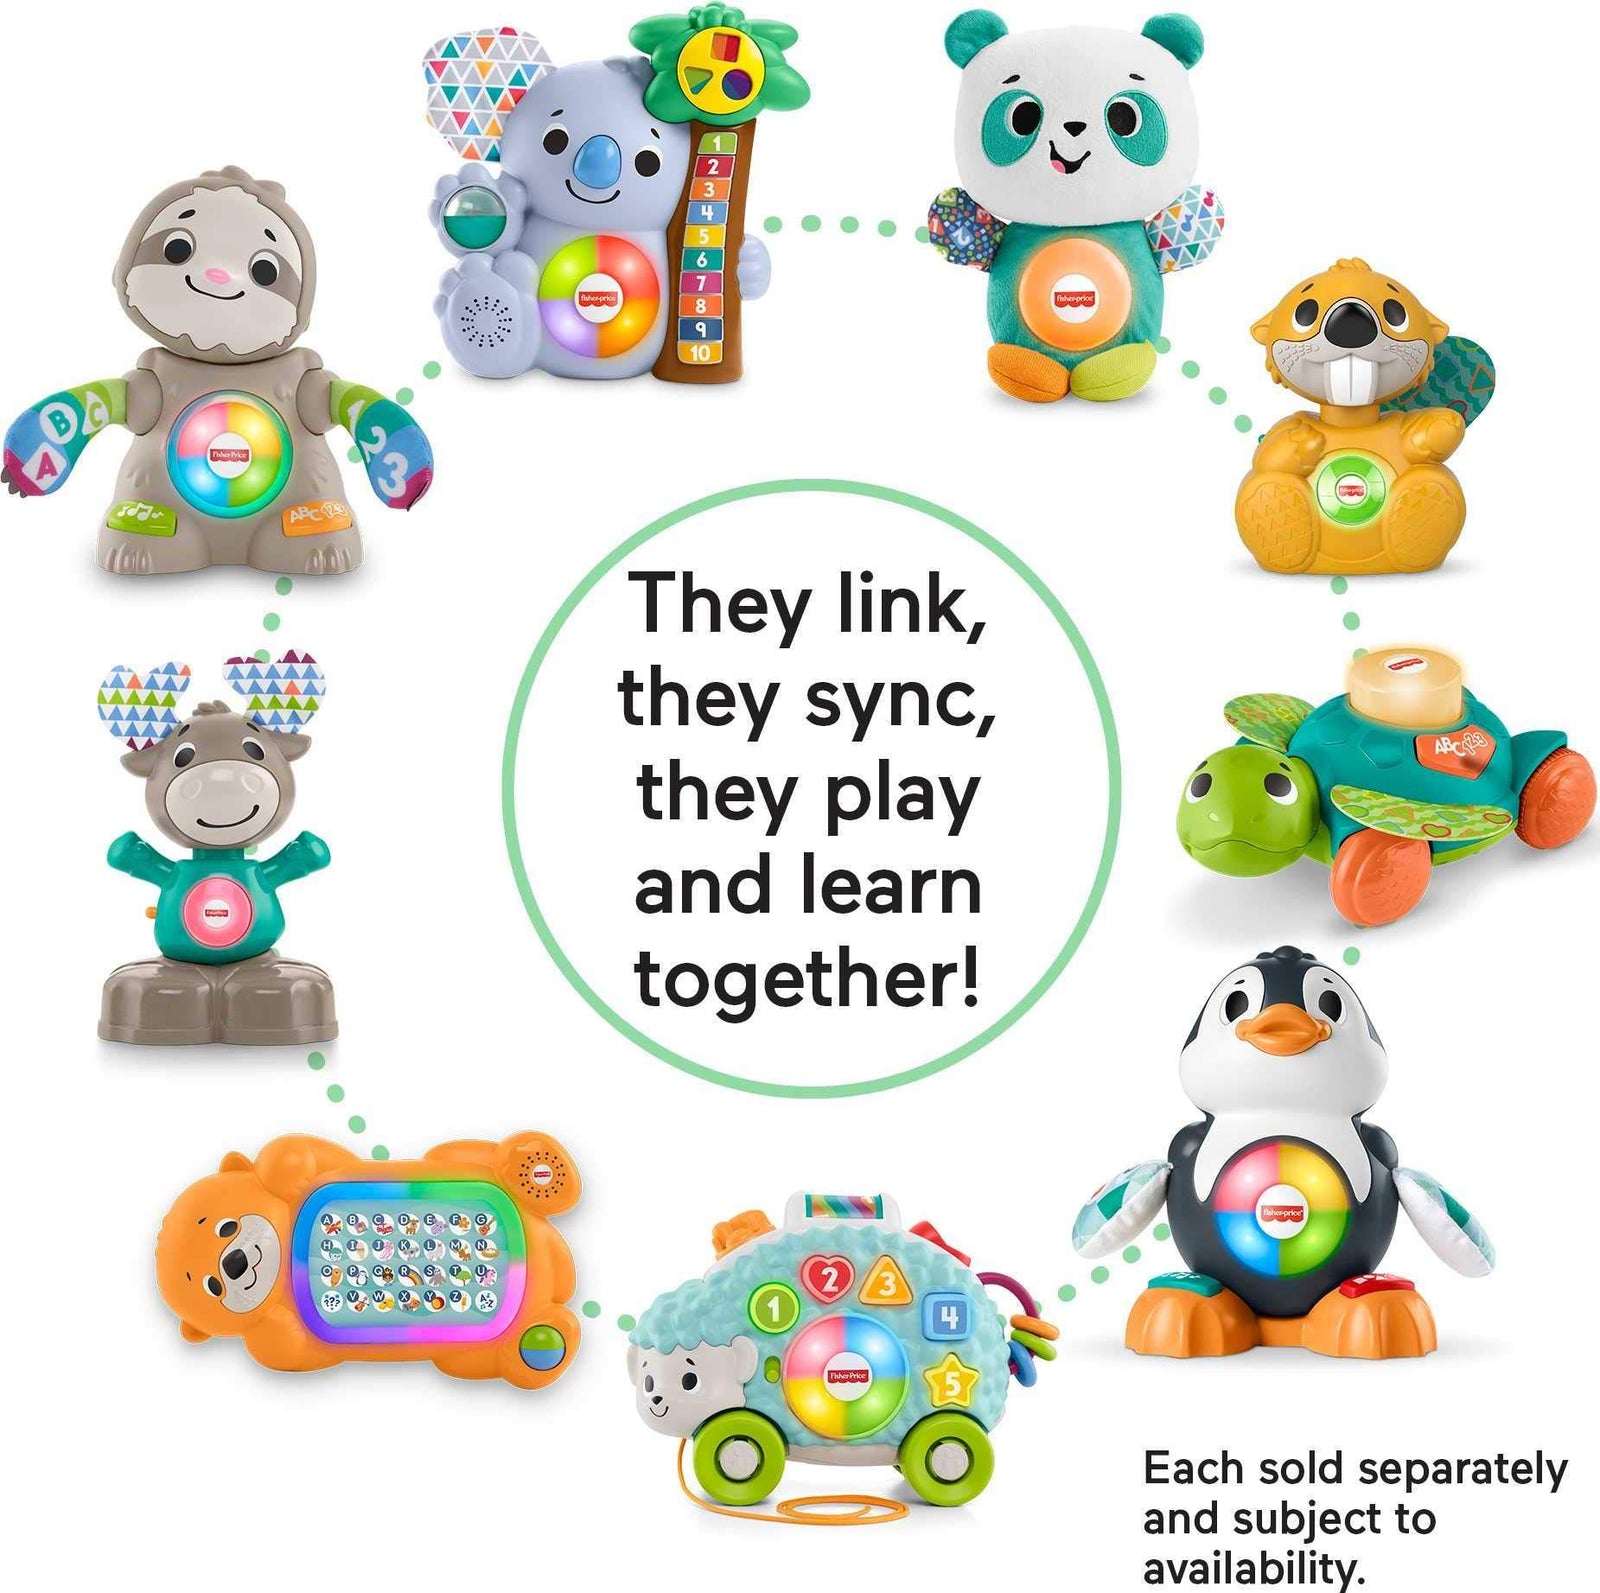 Fisher-Price Linkimals Cool Beats Penguin, Musical Infant Toy with Lights, Motions, and Educational Songs for Infants and Toddlers